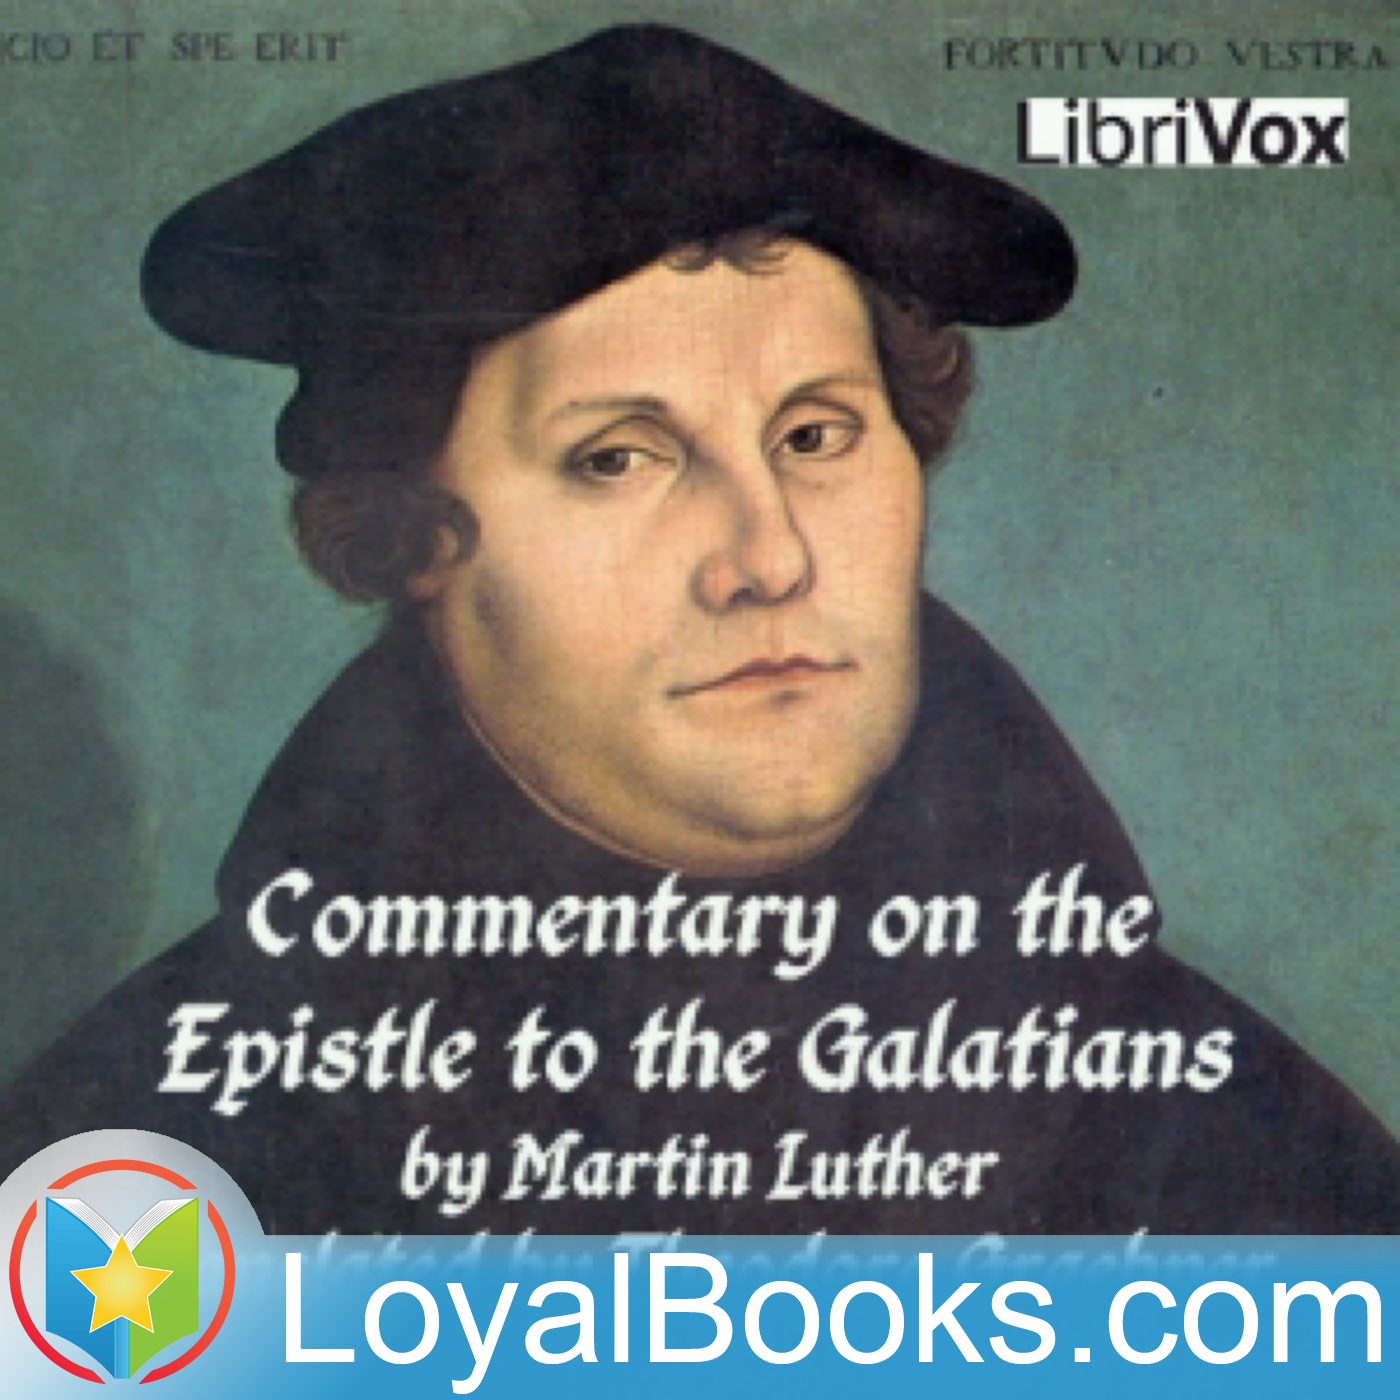 Commentary on St. Paul's Epistle to the Galatians by Martin Luther